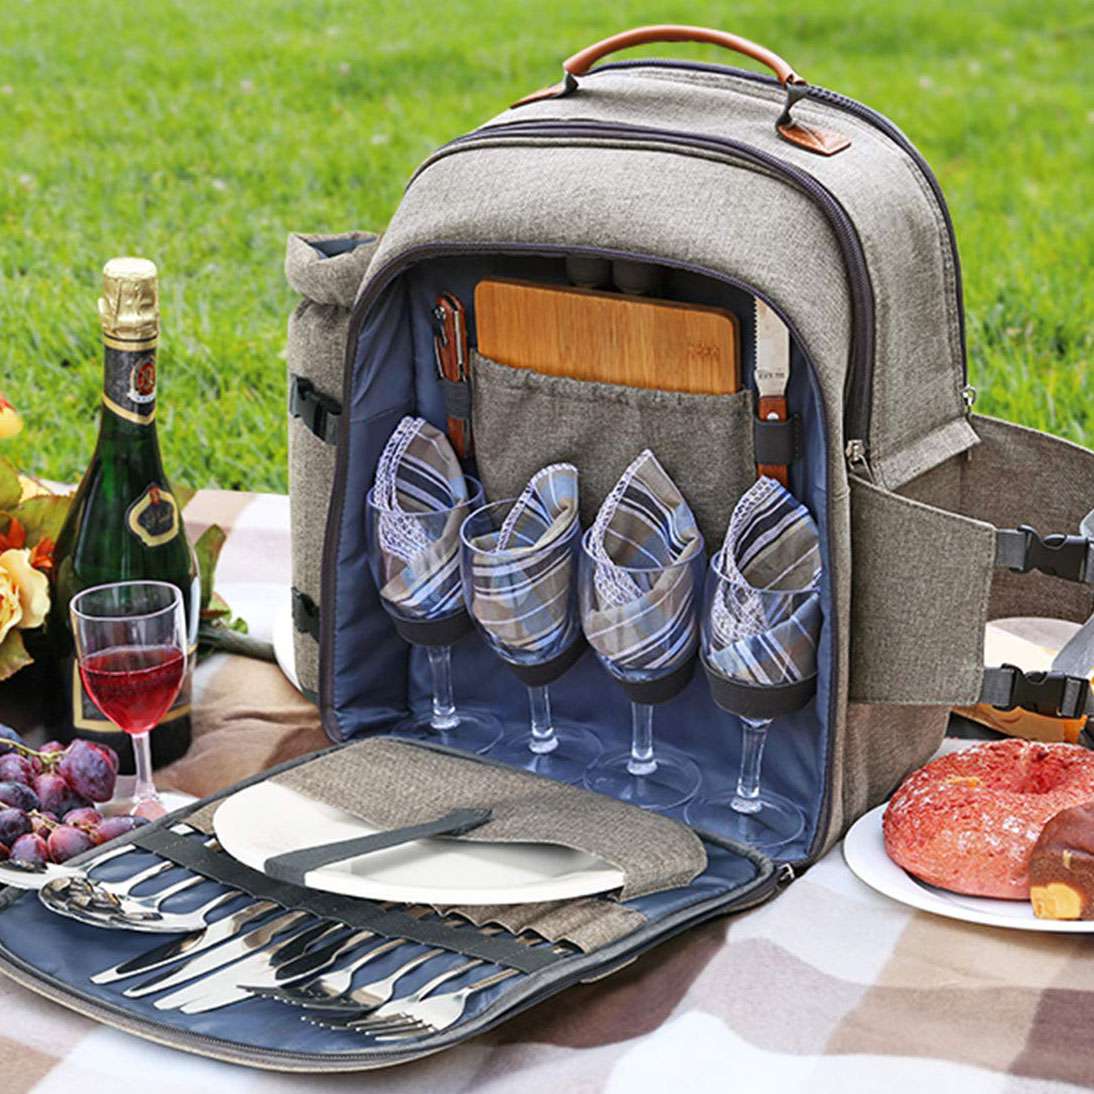 Glasses Detachable Bottle/Wine Holder Gray Insulated Backpack Cooler Cutlery Picnic Set for 4 Plus Waterproof Pouch Nordics Living Picnic Backpack for 4 Persons Picnic Plates Fleece Blanket